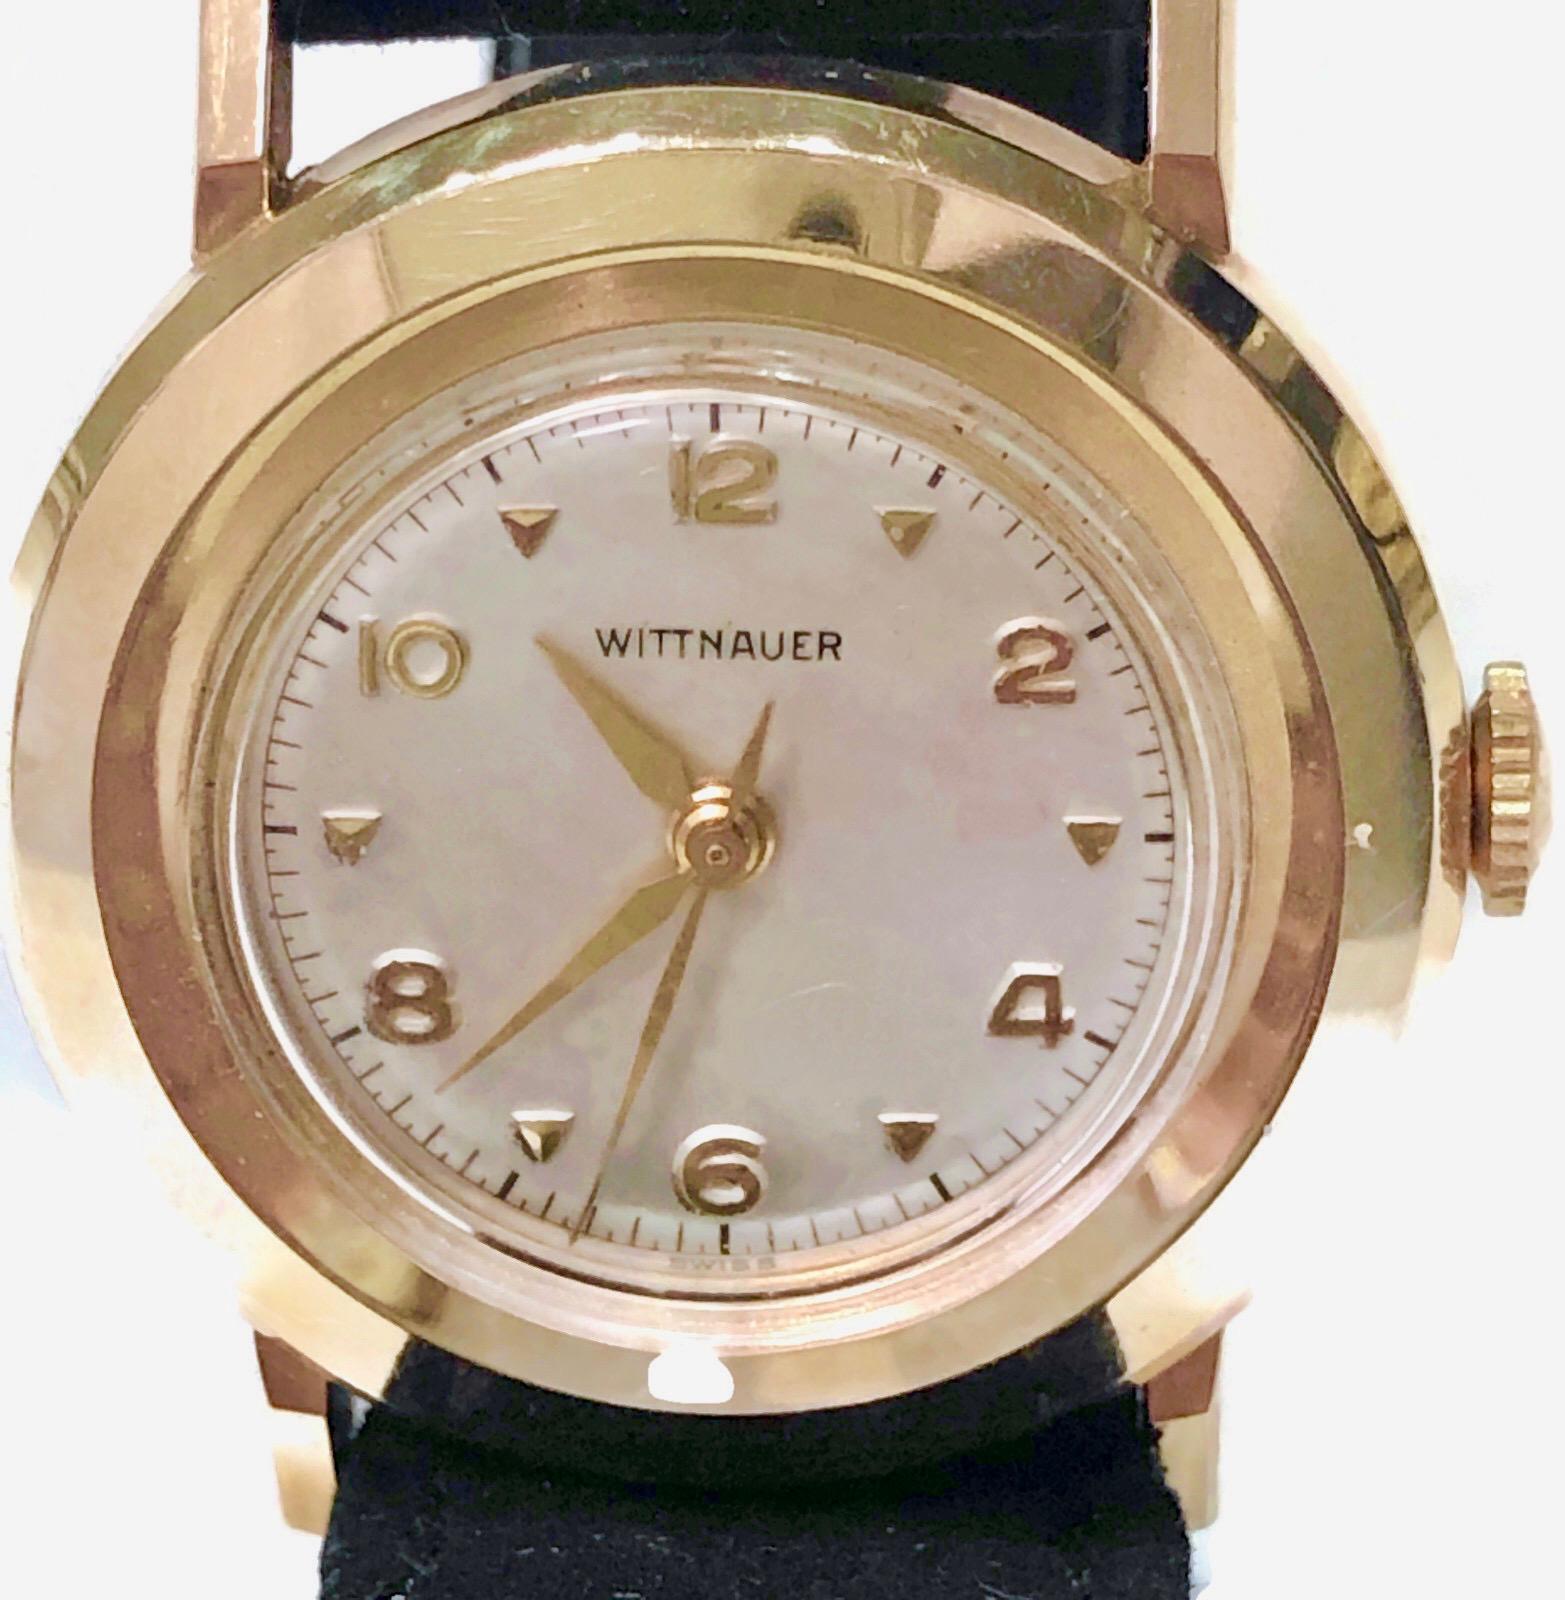 Vintage Wittnaur 14k yellow gold  watch with a round face and an automatic movement.  The watch is in the Art Deco style with an original black suede band with a 14k gold buckle.. 

The watch is in mint condition; the band is quite usable  The band